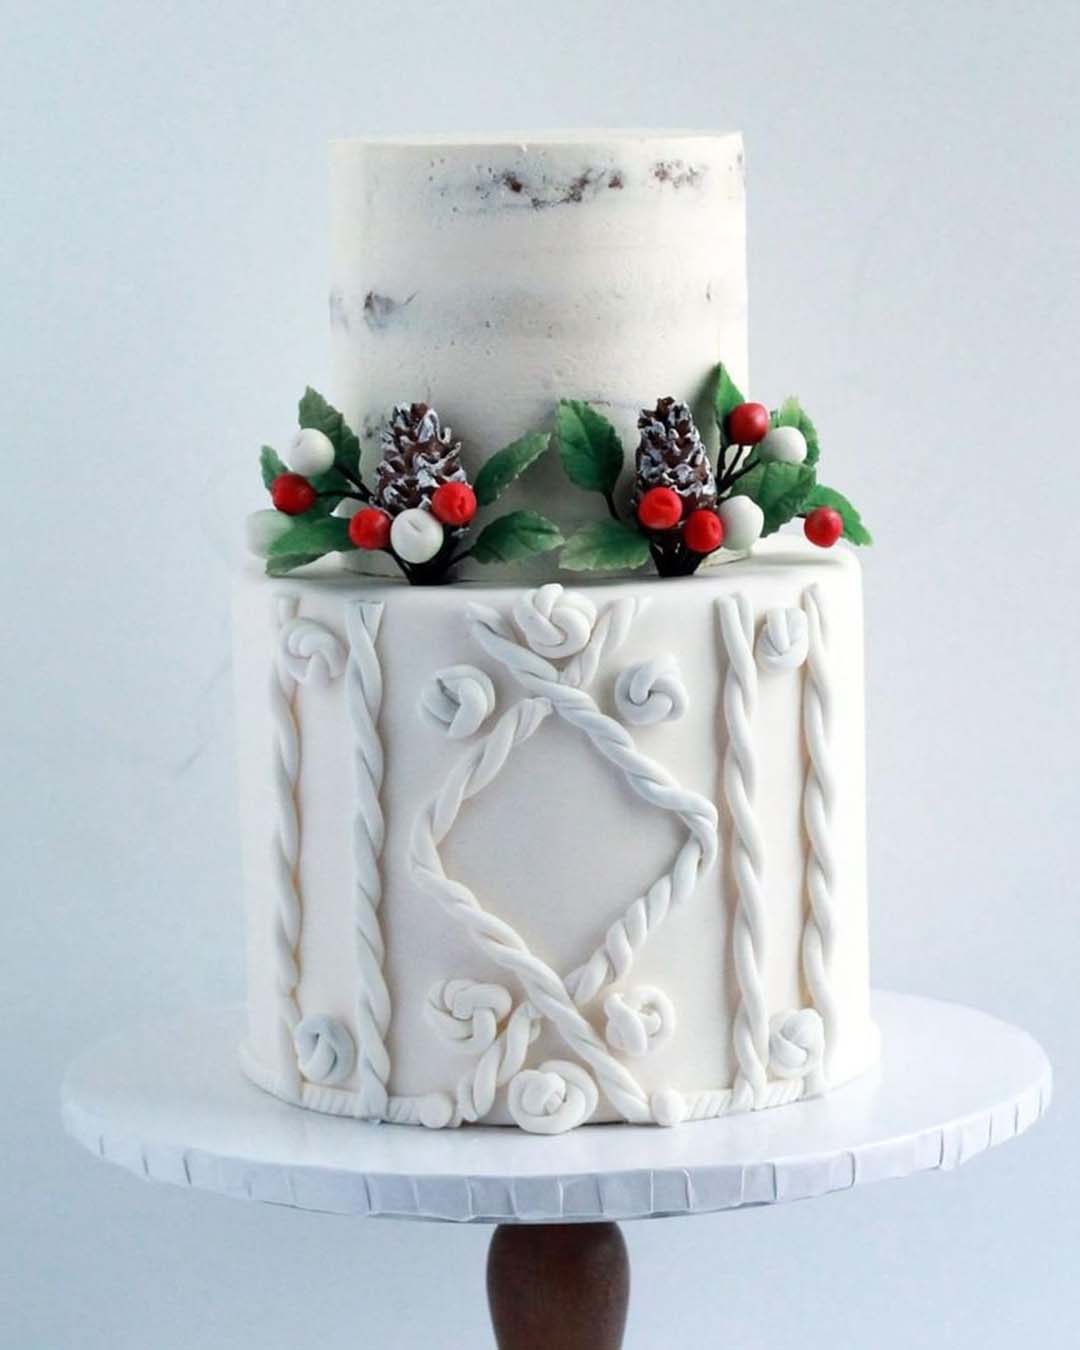 winter wedding cakes white with red berries and cones sweetavenuecakery